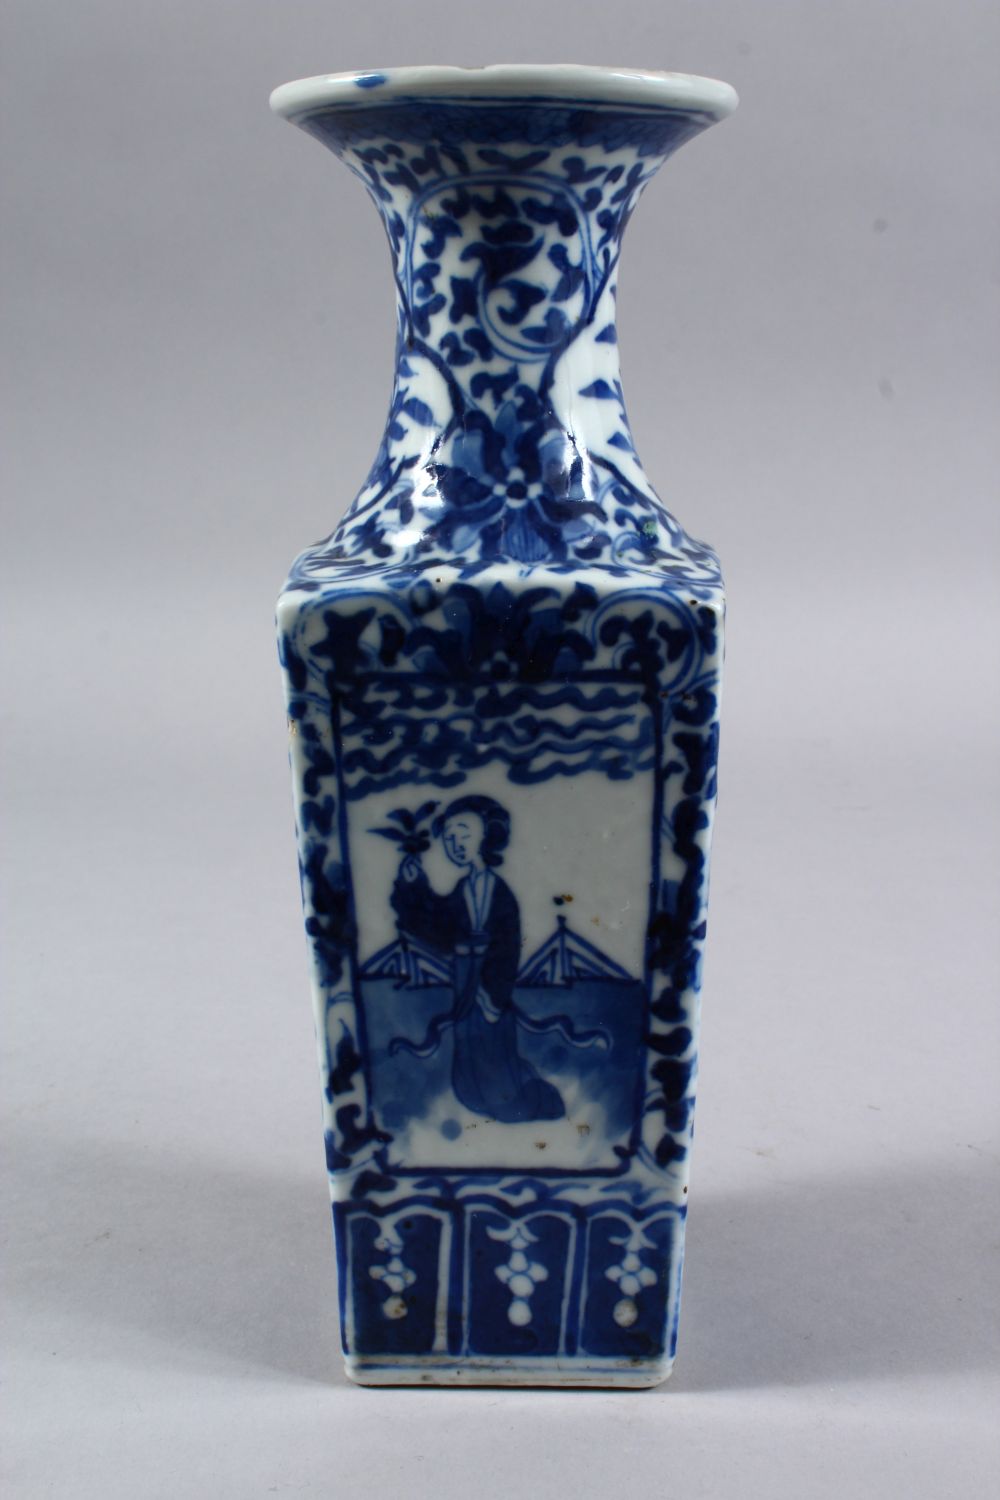 A GOOD 19TH CENTURY CHINESE BLUE & WHITE PORCELAIN SQUARE FORM VASE, the body with four panels of - Image 3 of 6